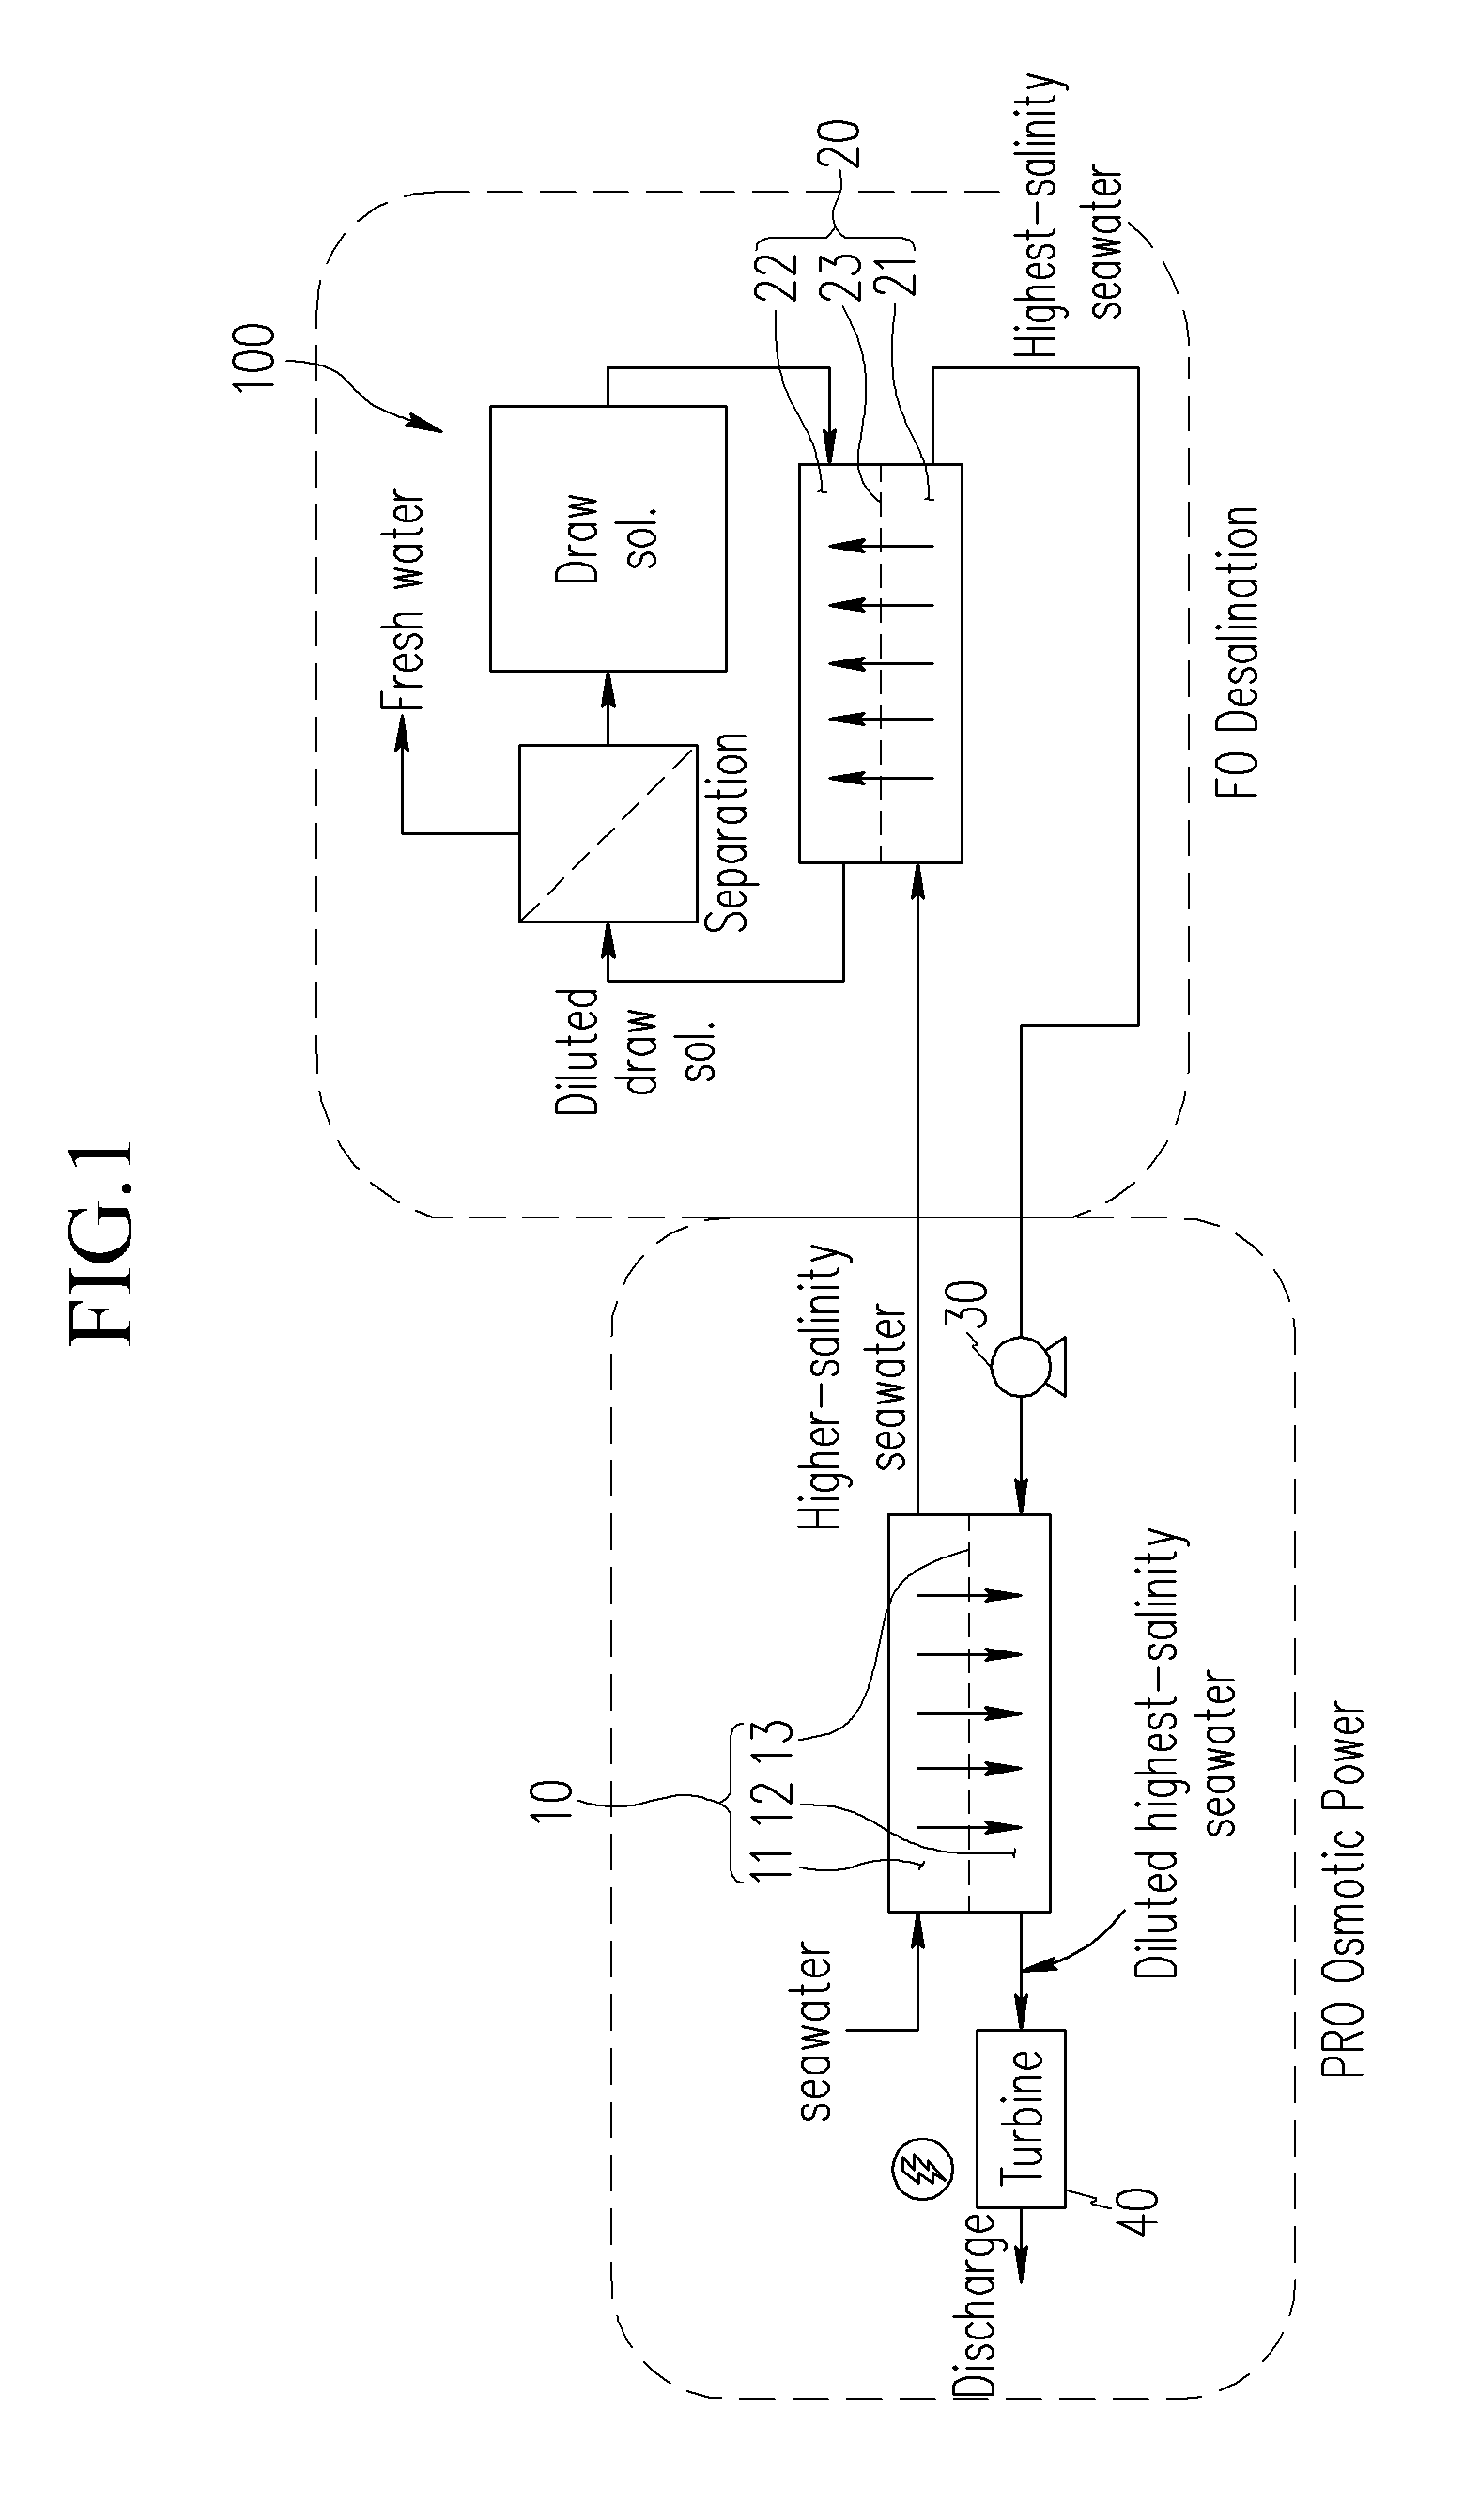 Apparatus for osmotic power generation and desalination using salinity difference